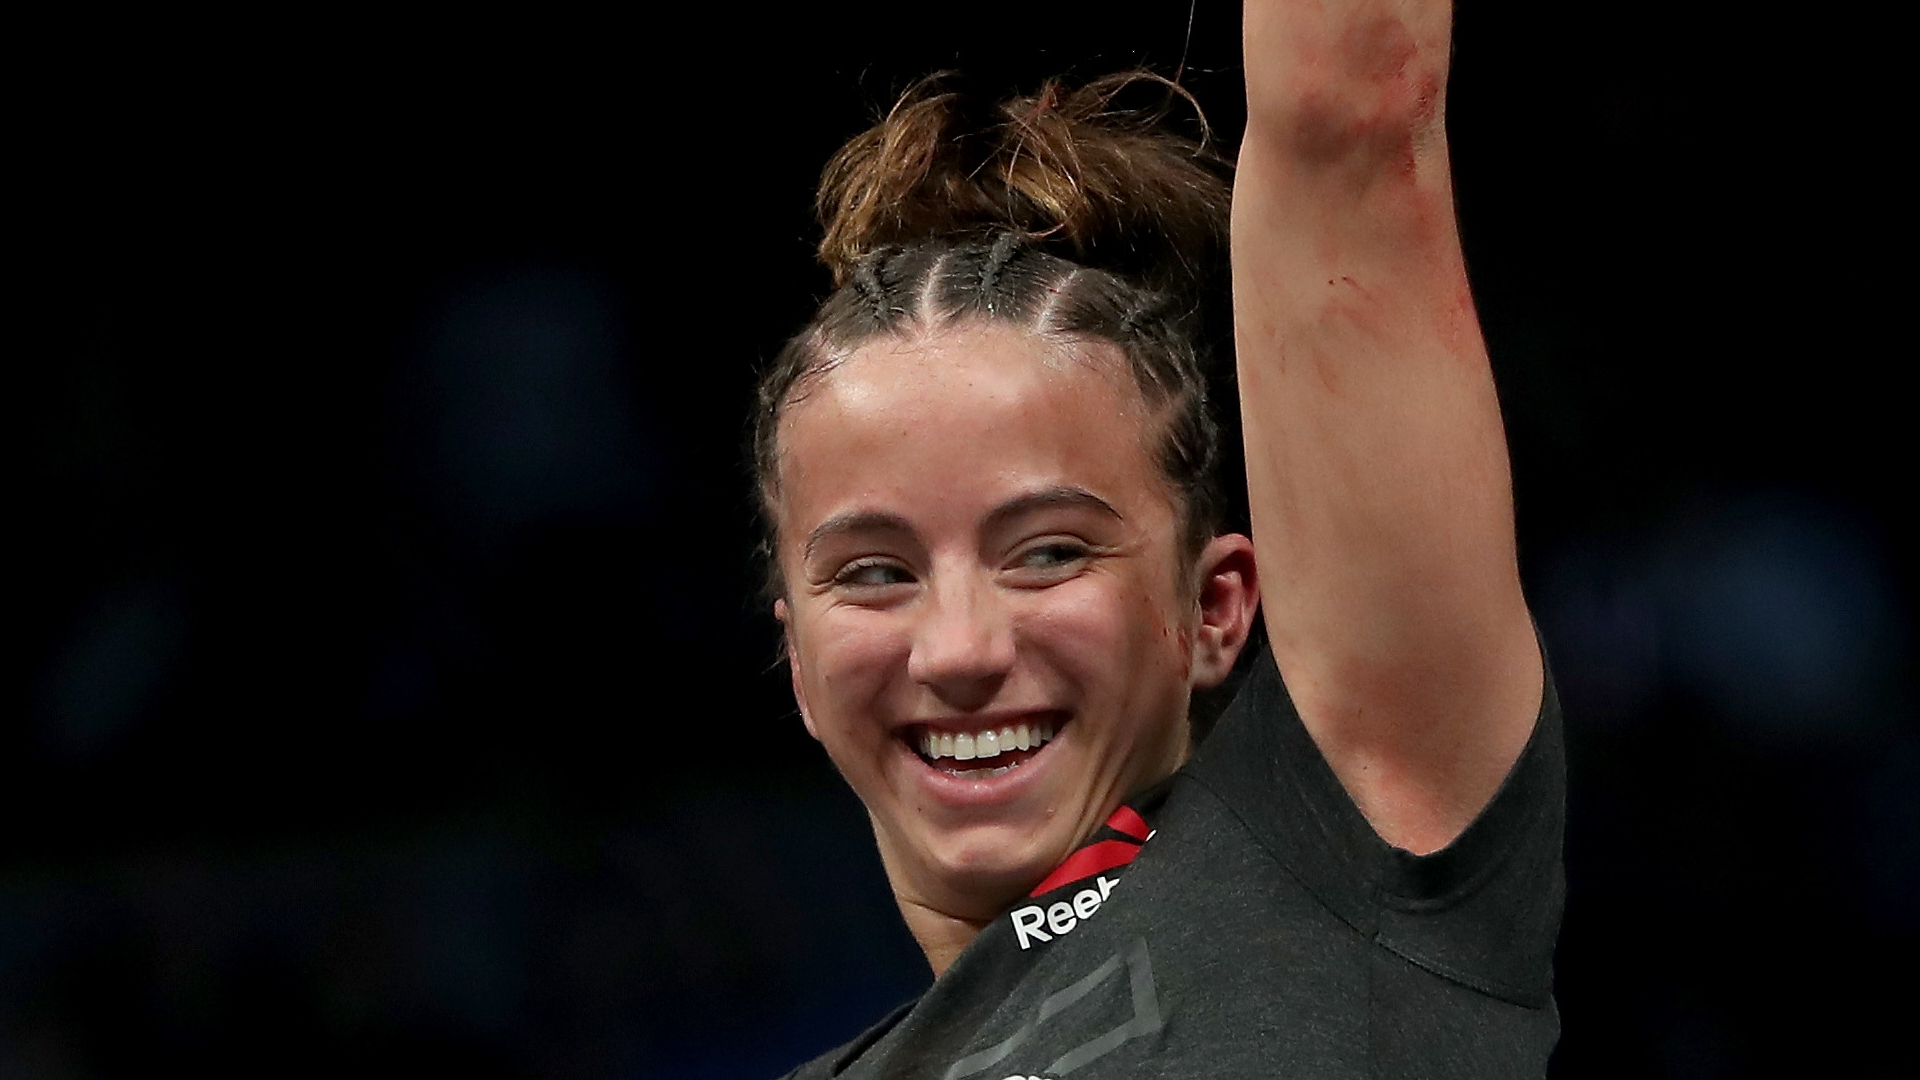 Maycee Barber talks goal of becoming youngest UFC champion ever | Sporting News1920 x 1080